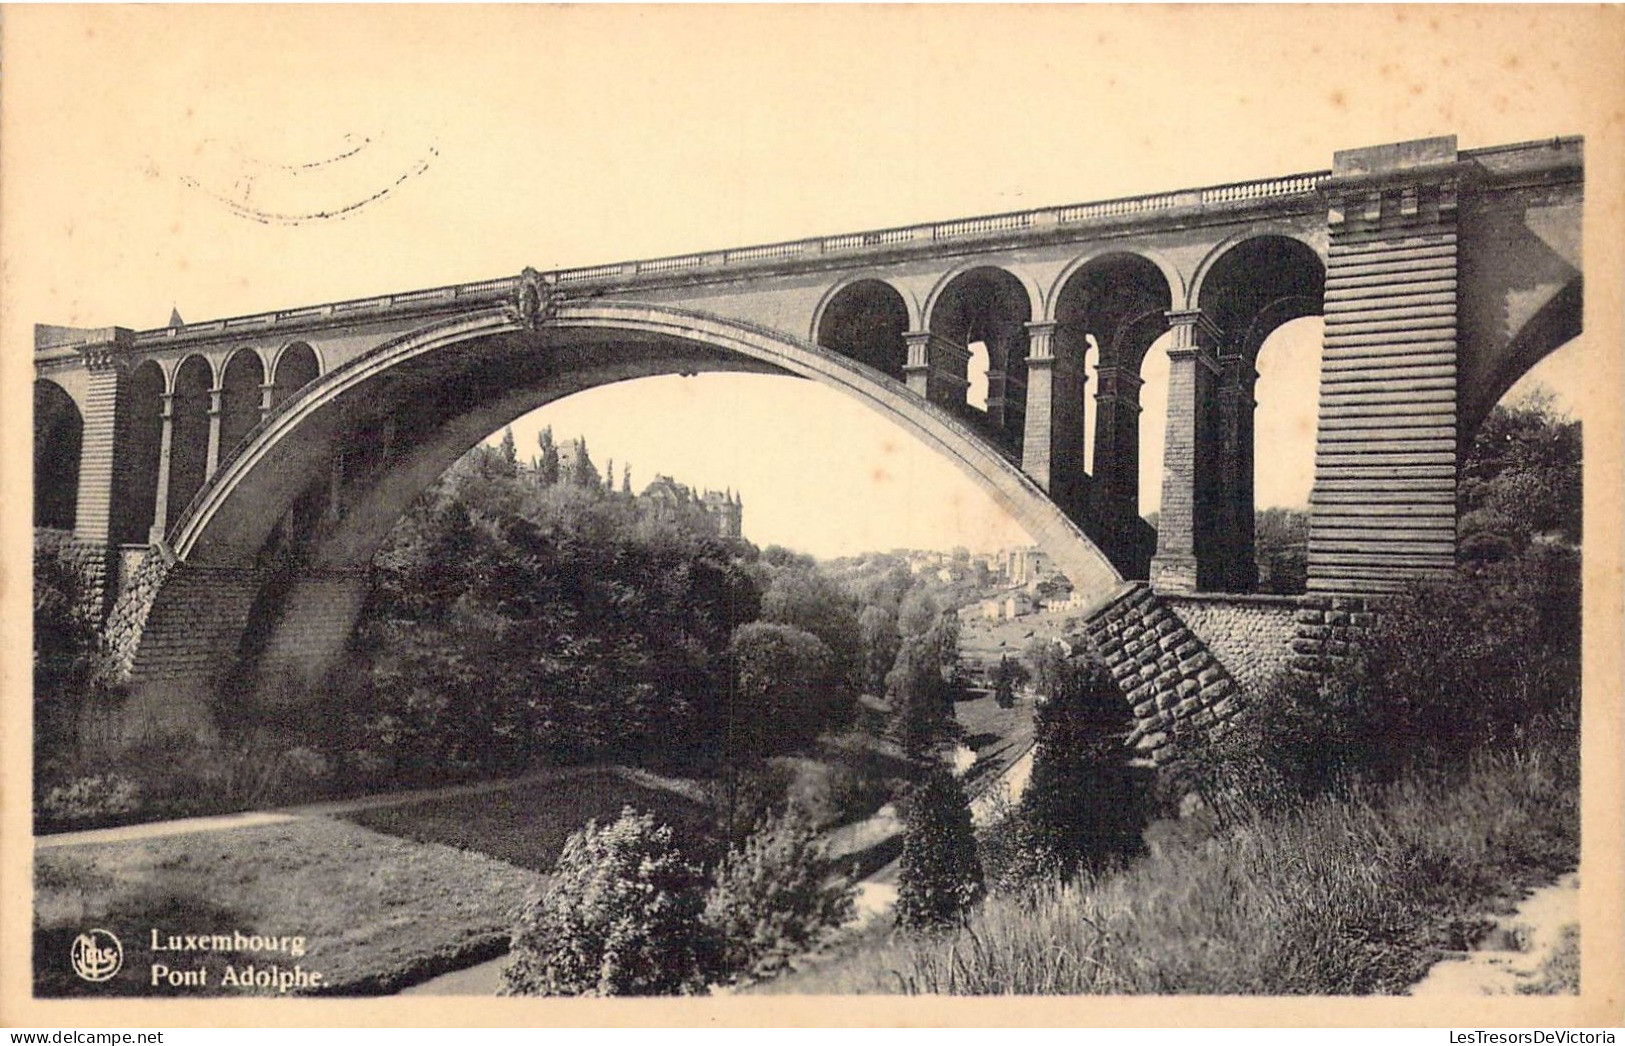 LUXEMBOURG - Ville - Pont Adolphe - Carte Postale Ancienne - Luxemburgo - Ciudad